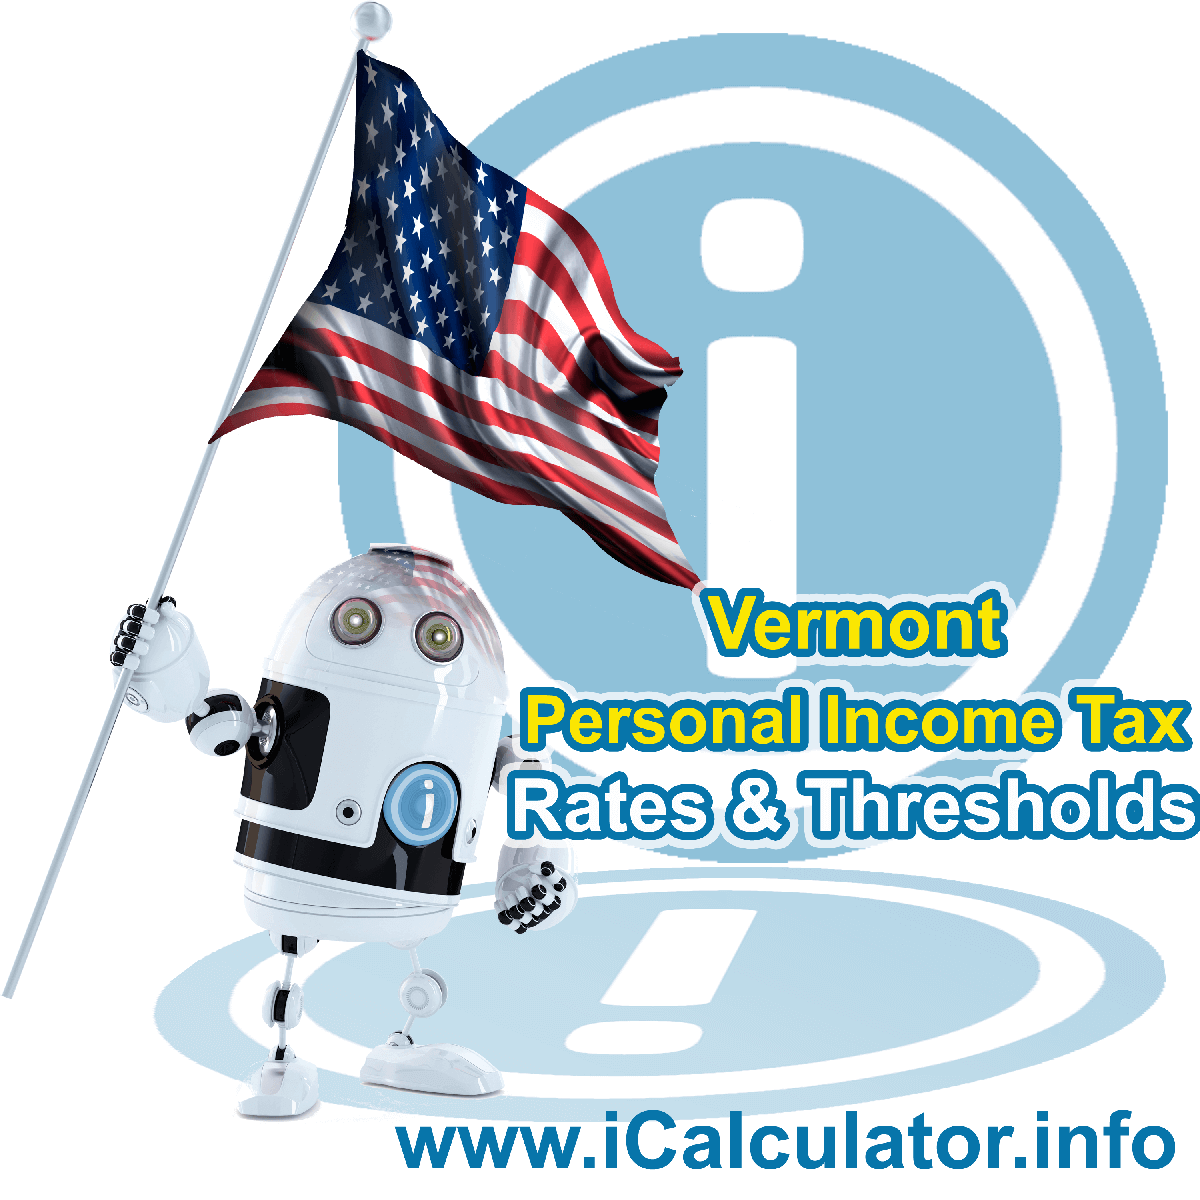 Vermont State Tax Tables 2019. This image displays details of the Vermont State Tax Tables for the 2019 tax return year which is provided in support of the 2019 US Tax Calculator